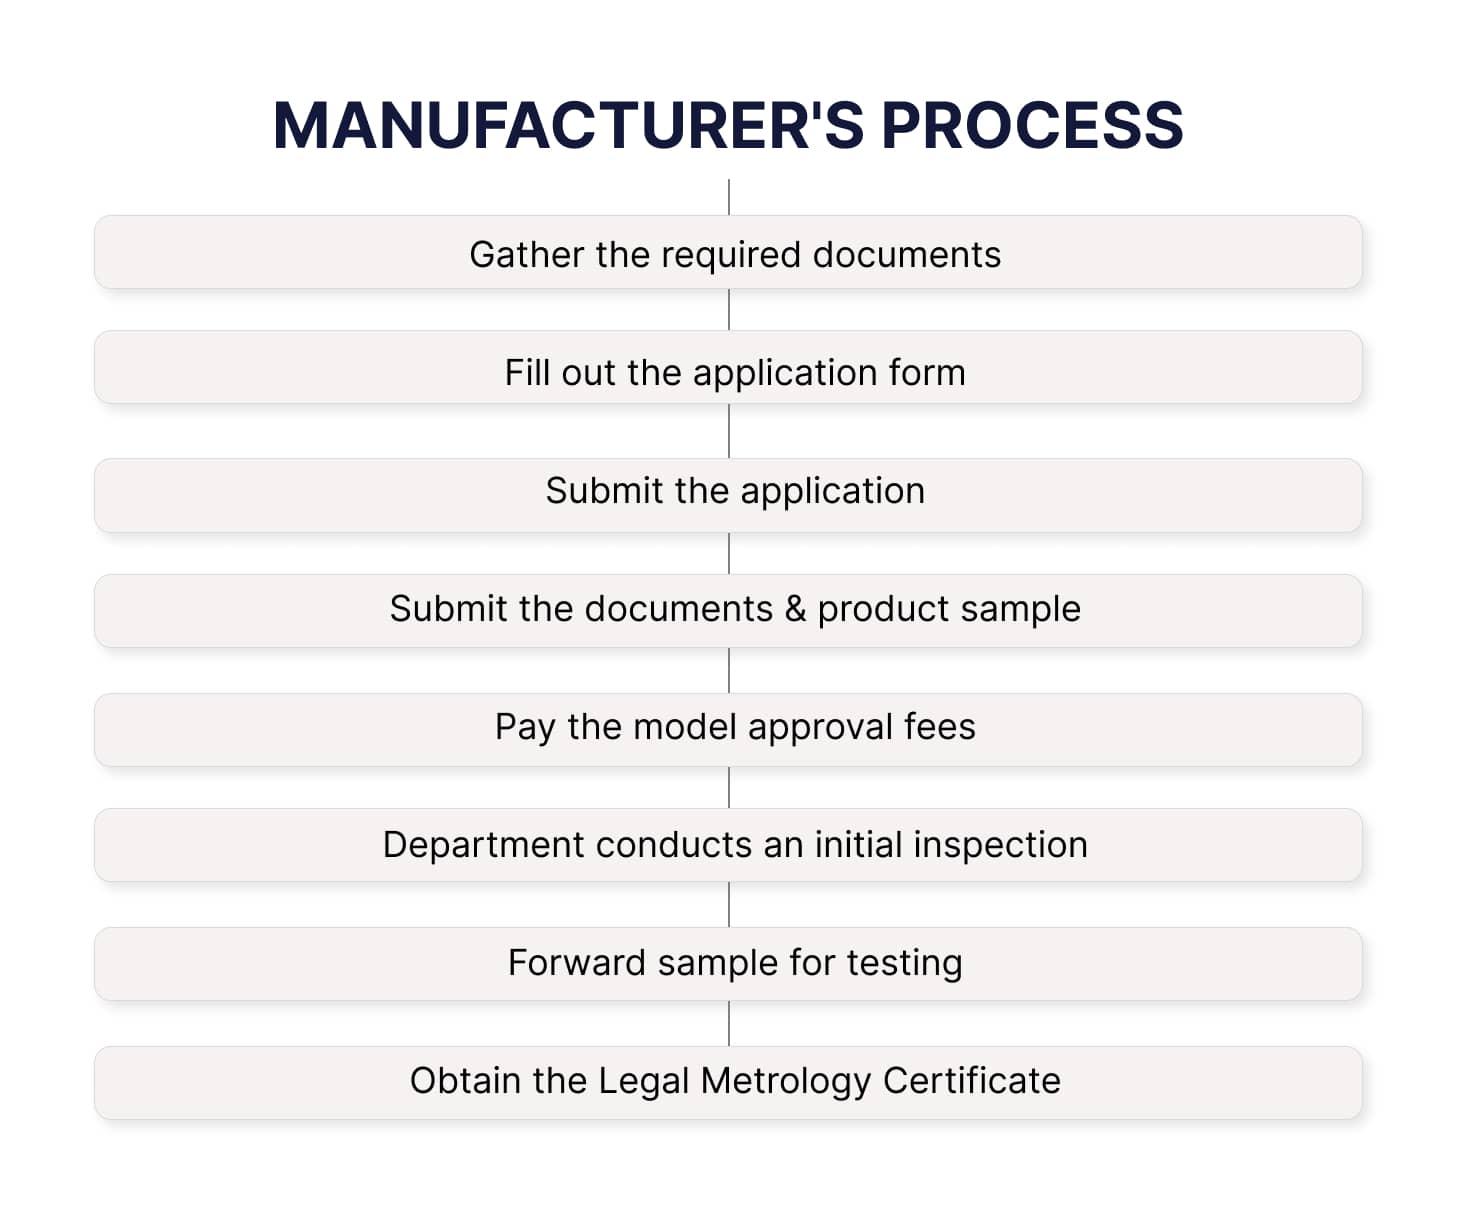 Process of obtaining the Model Approval in India